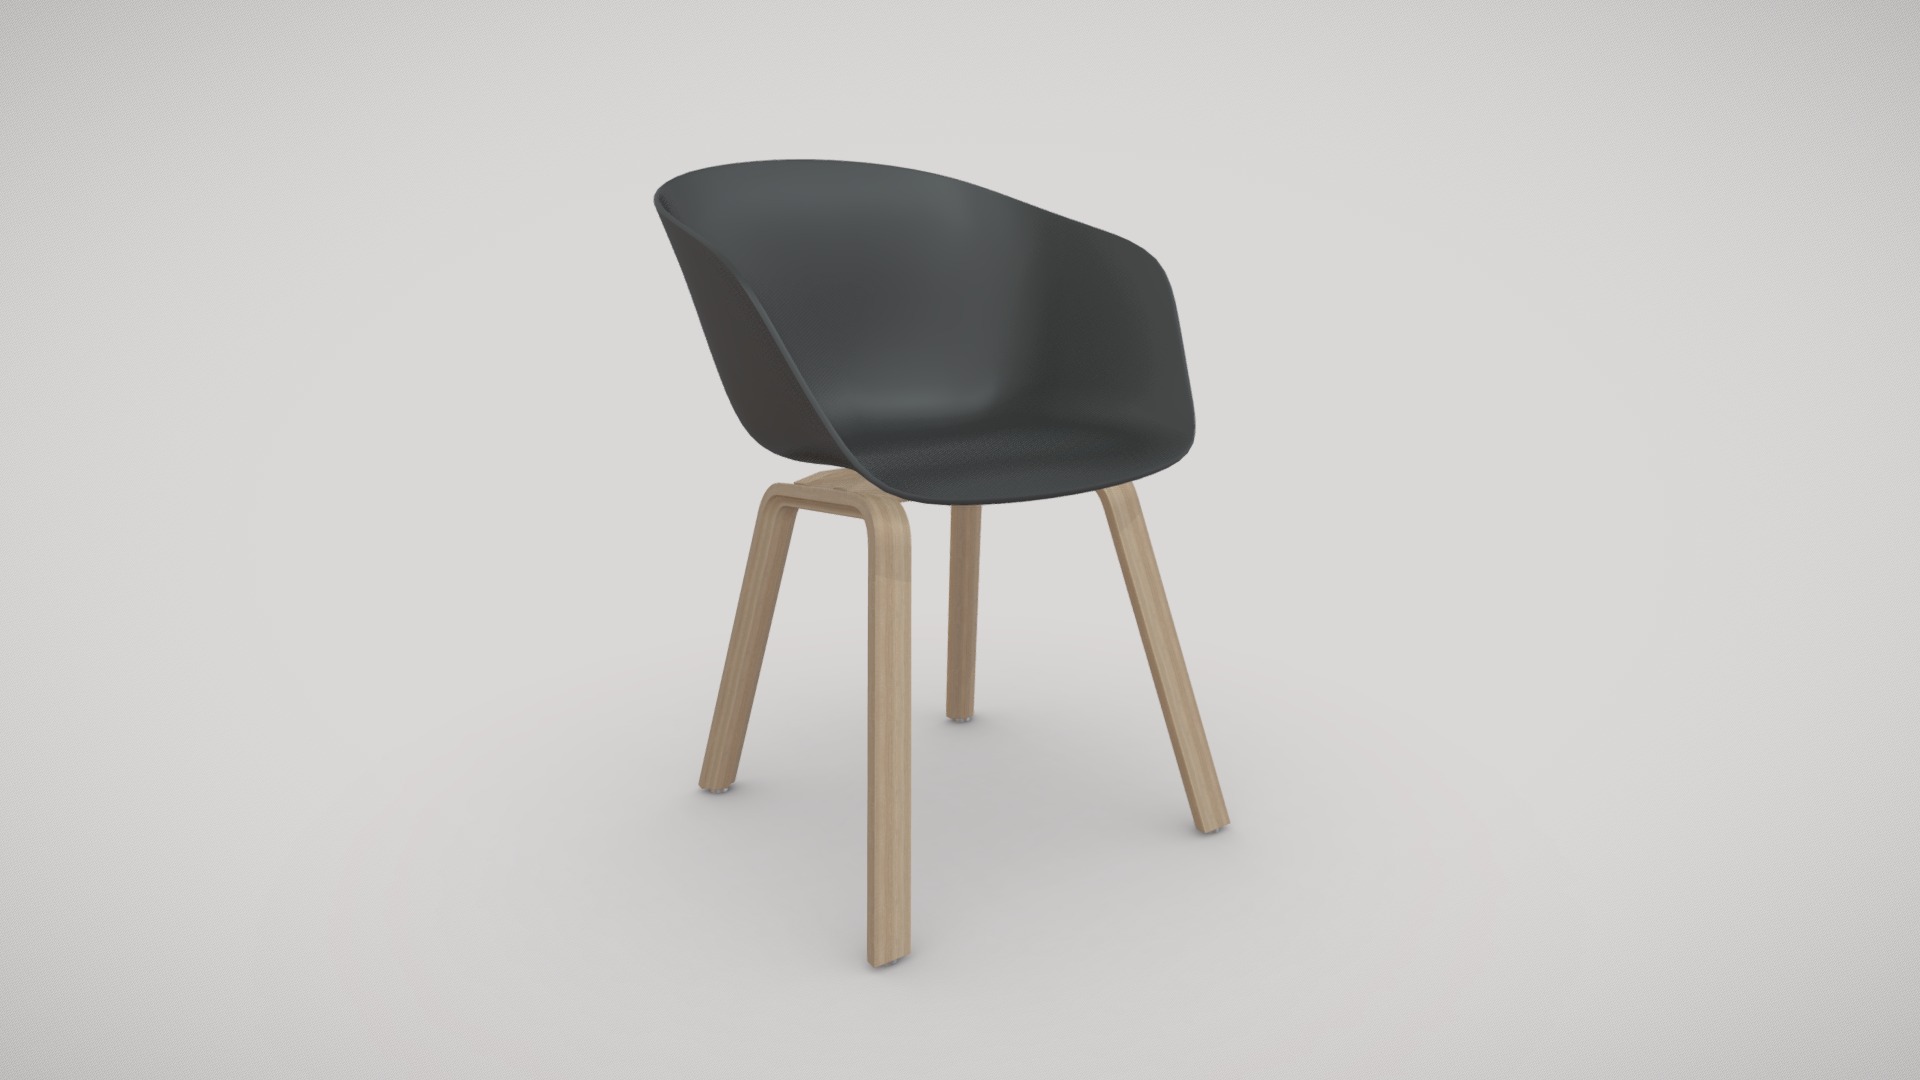 3D model Chair AAC22 By Hay - This is a 3D model of the Chair AAC22 By Hay. The 3D model is about a black chair with a cushion.